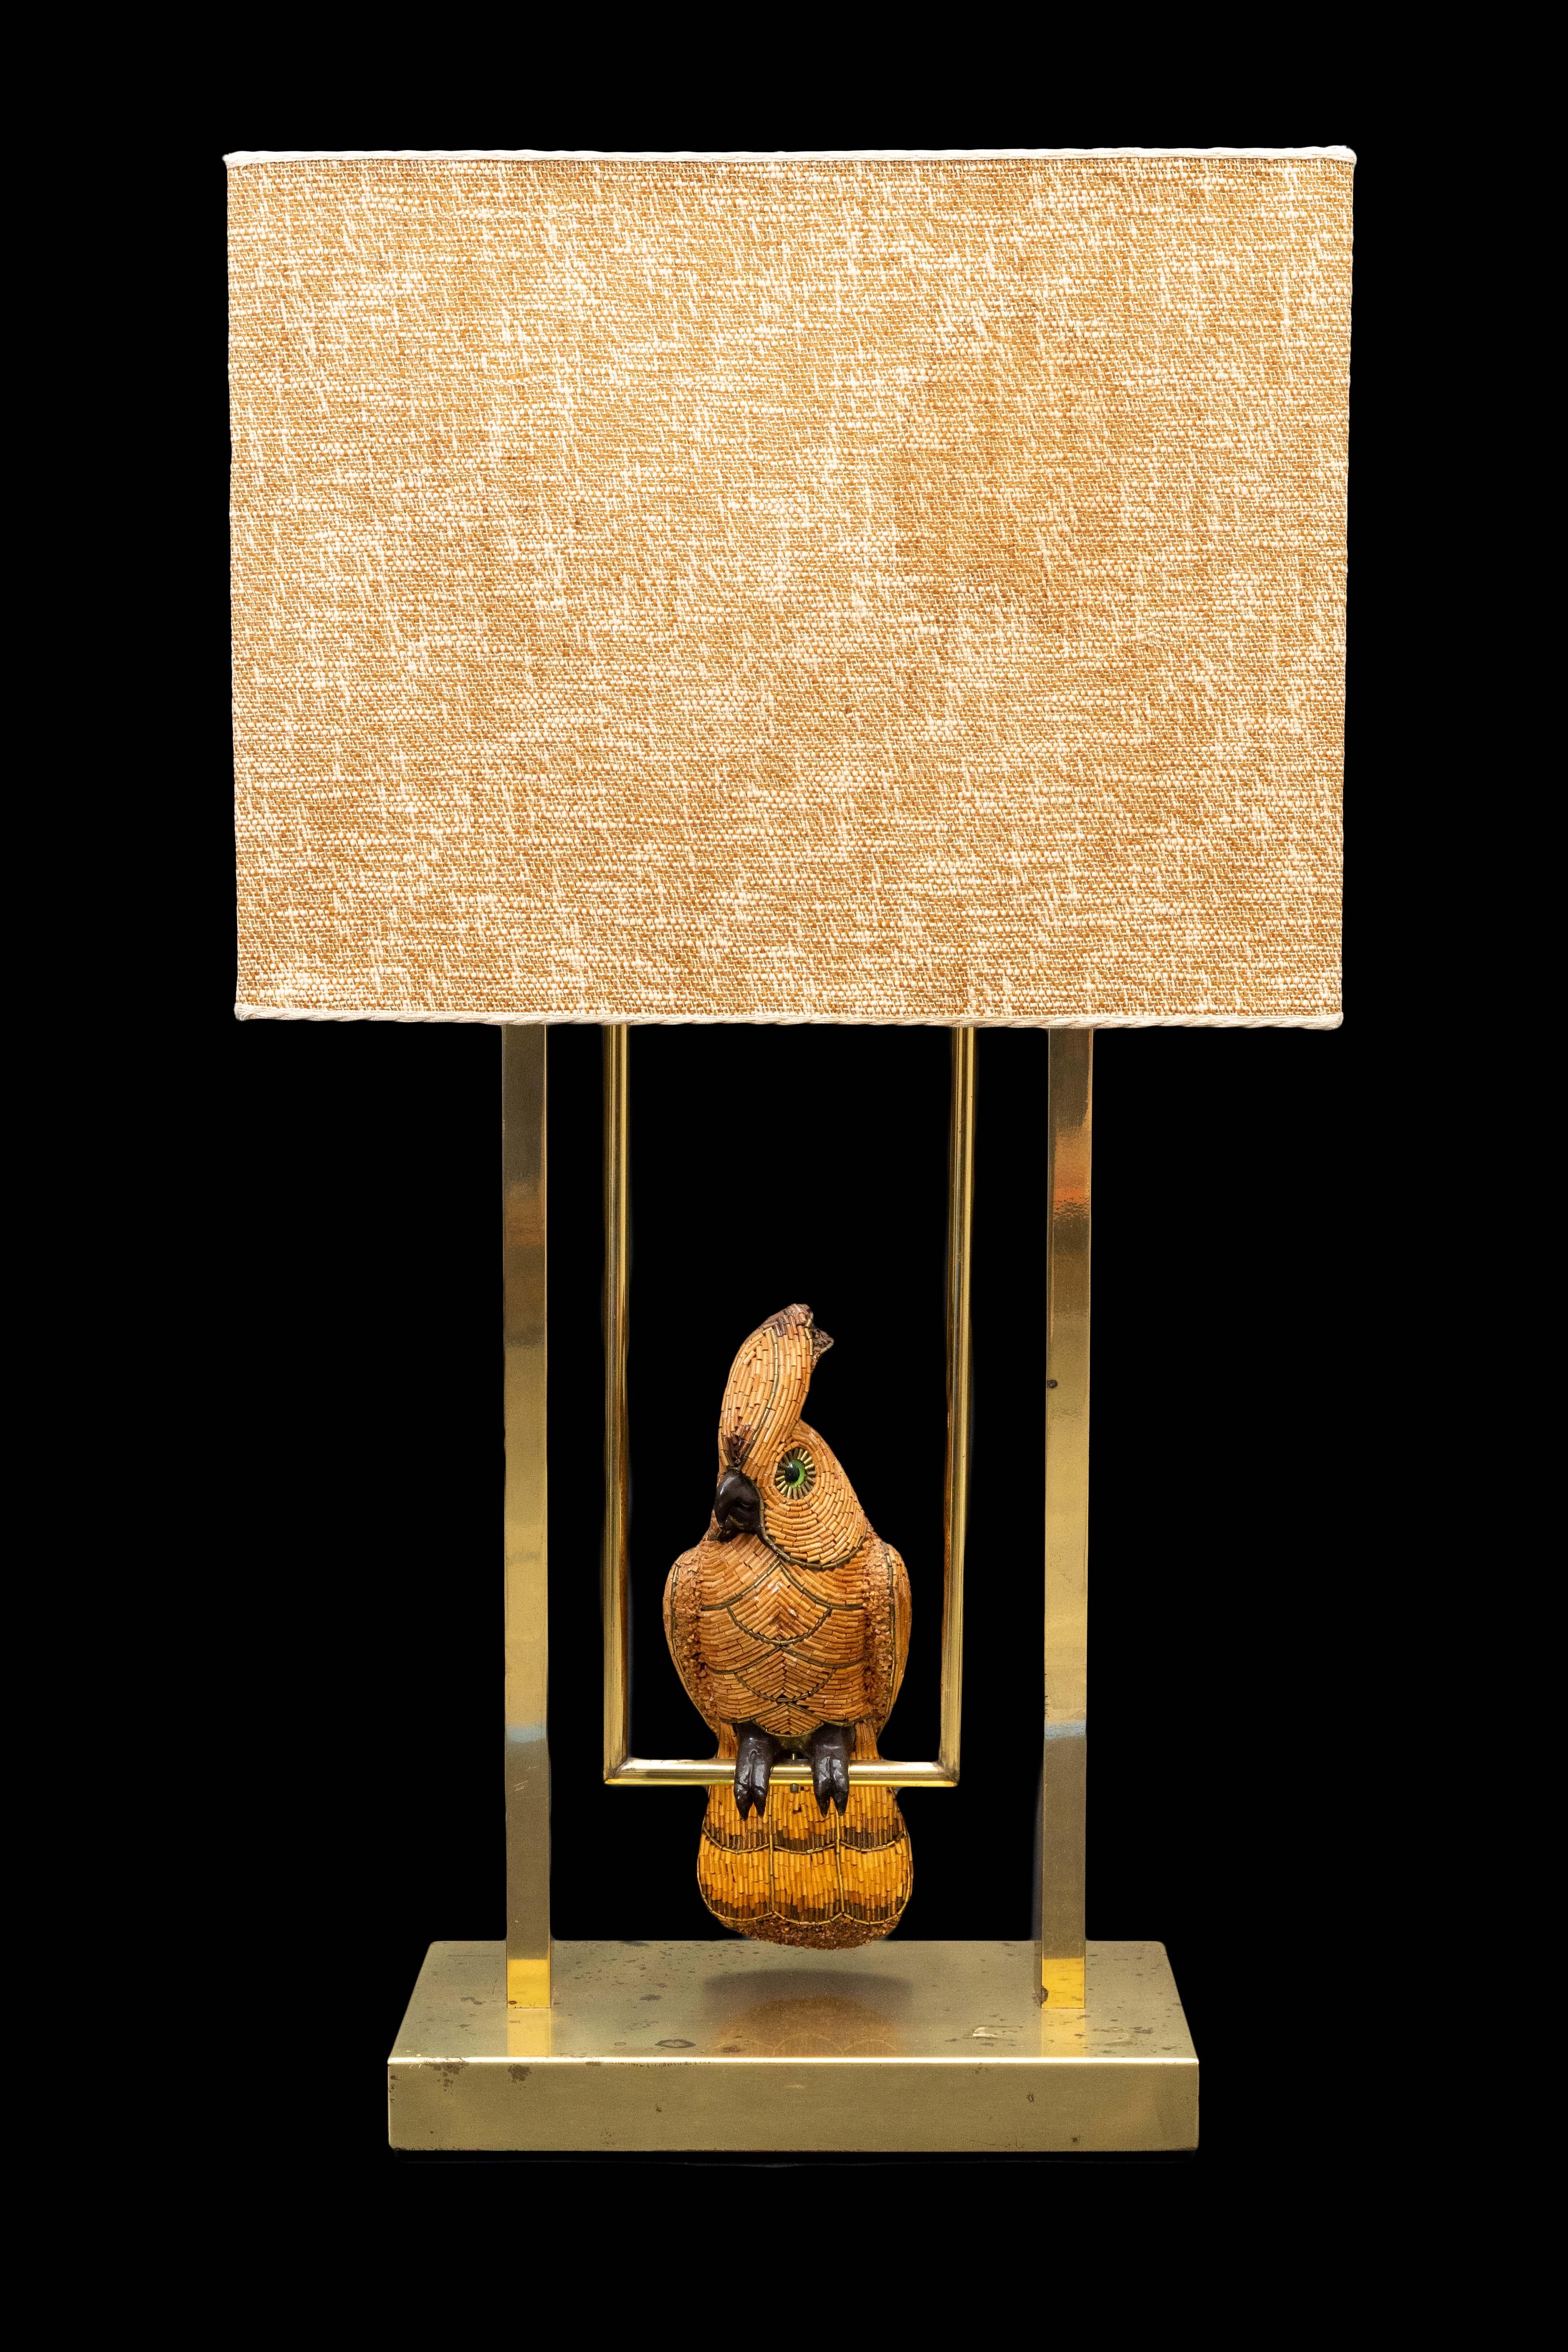 Mid Century French cockatoo lamp. Cockatoo is beaded and is mounted on a working swing. Original Mid Century linen shade:

Measures: 18